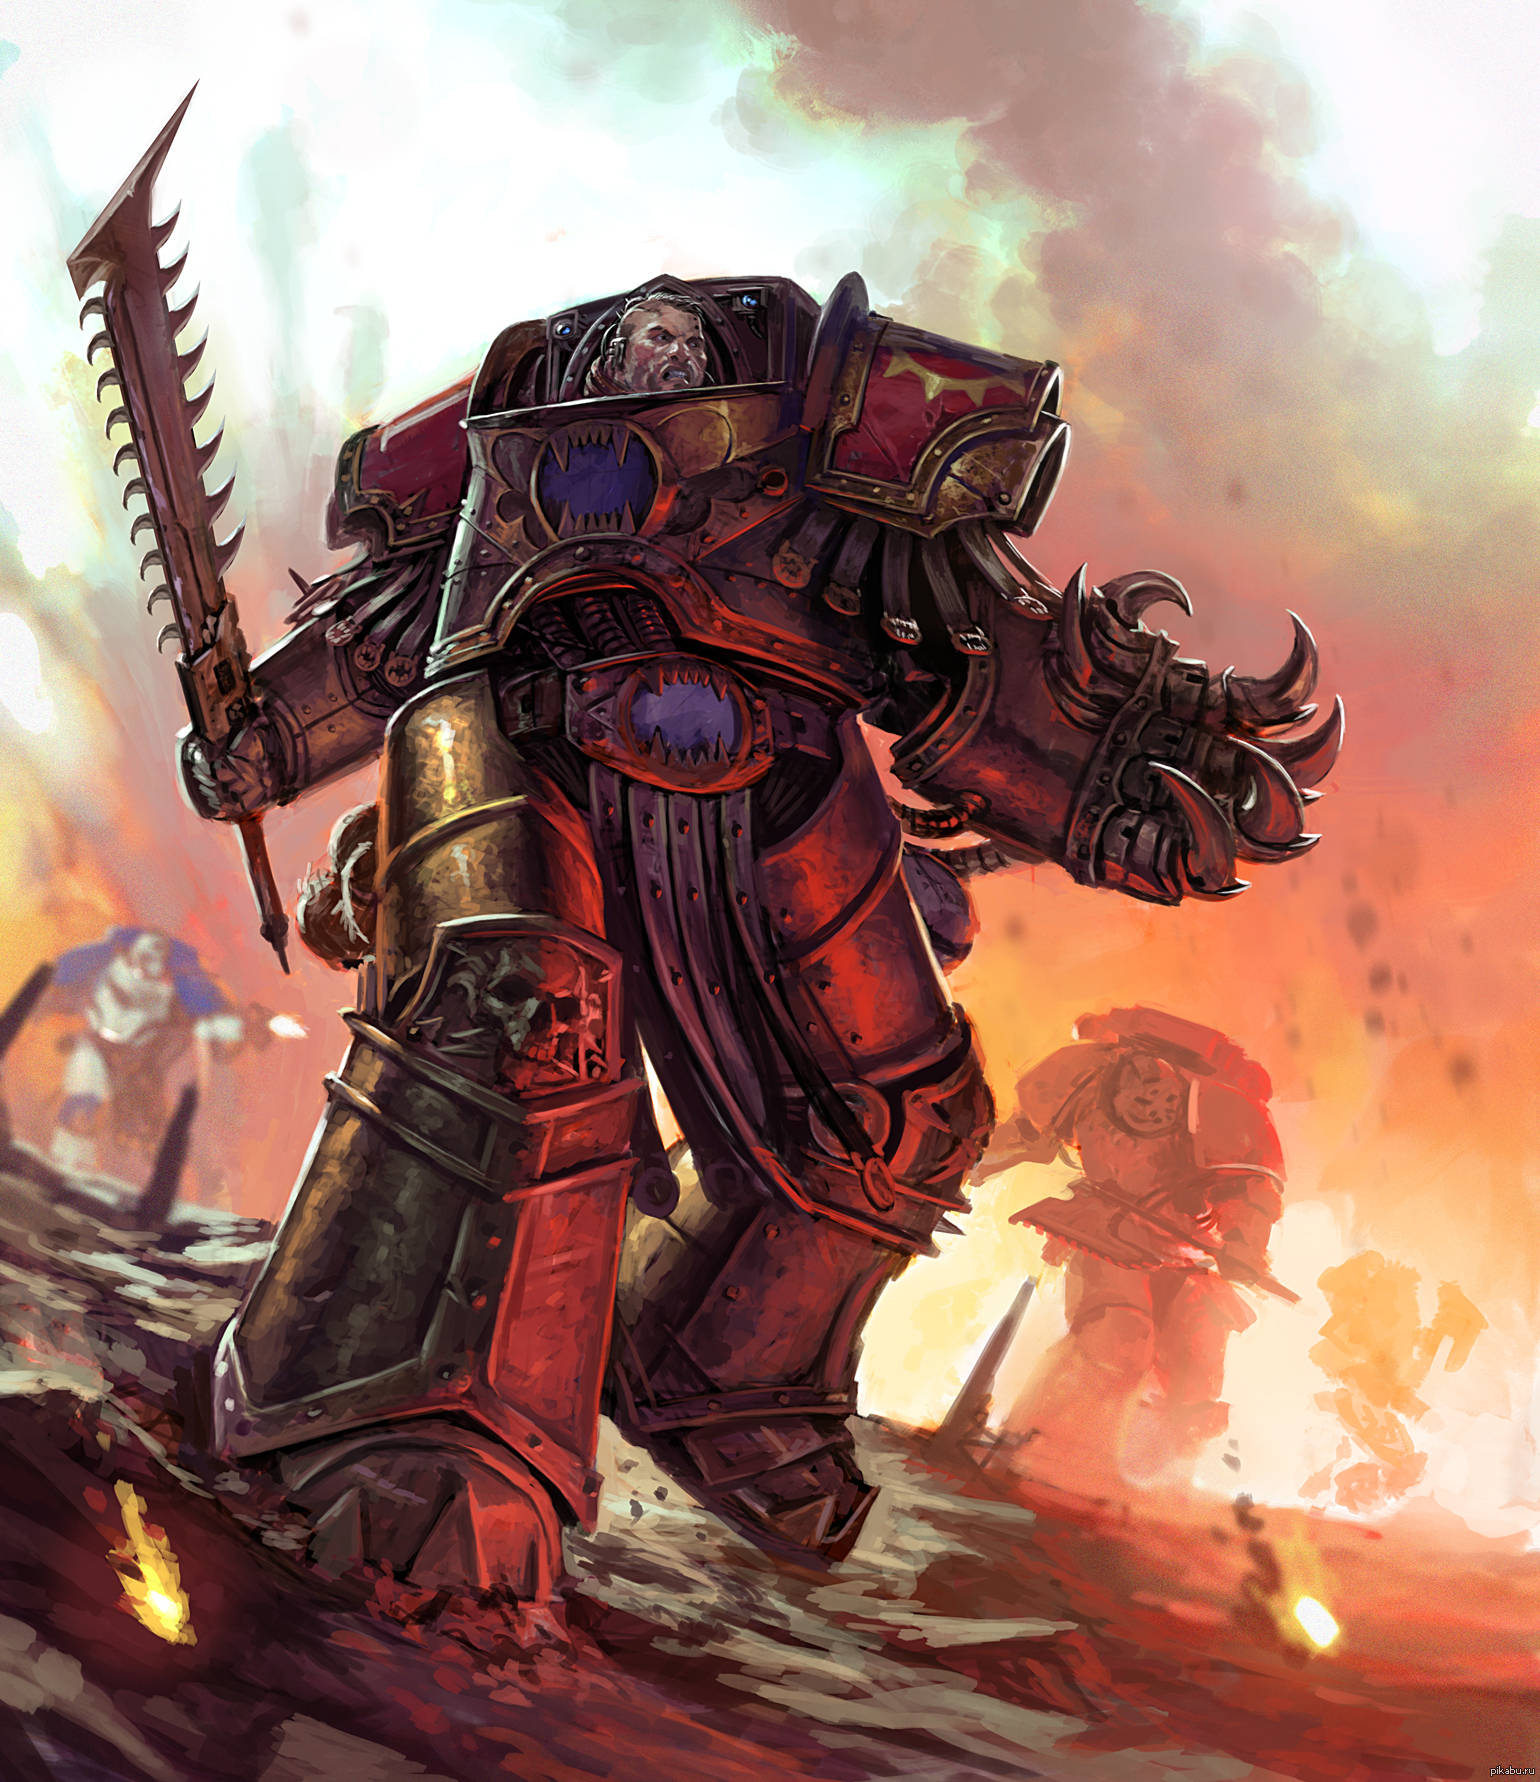 Mikhail Bloodrage Mikhail Bloodrage, cataphractii and Devourer of the World Eaters Legion, the Bloody XIIth!